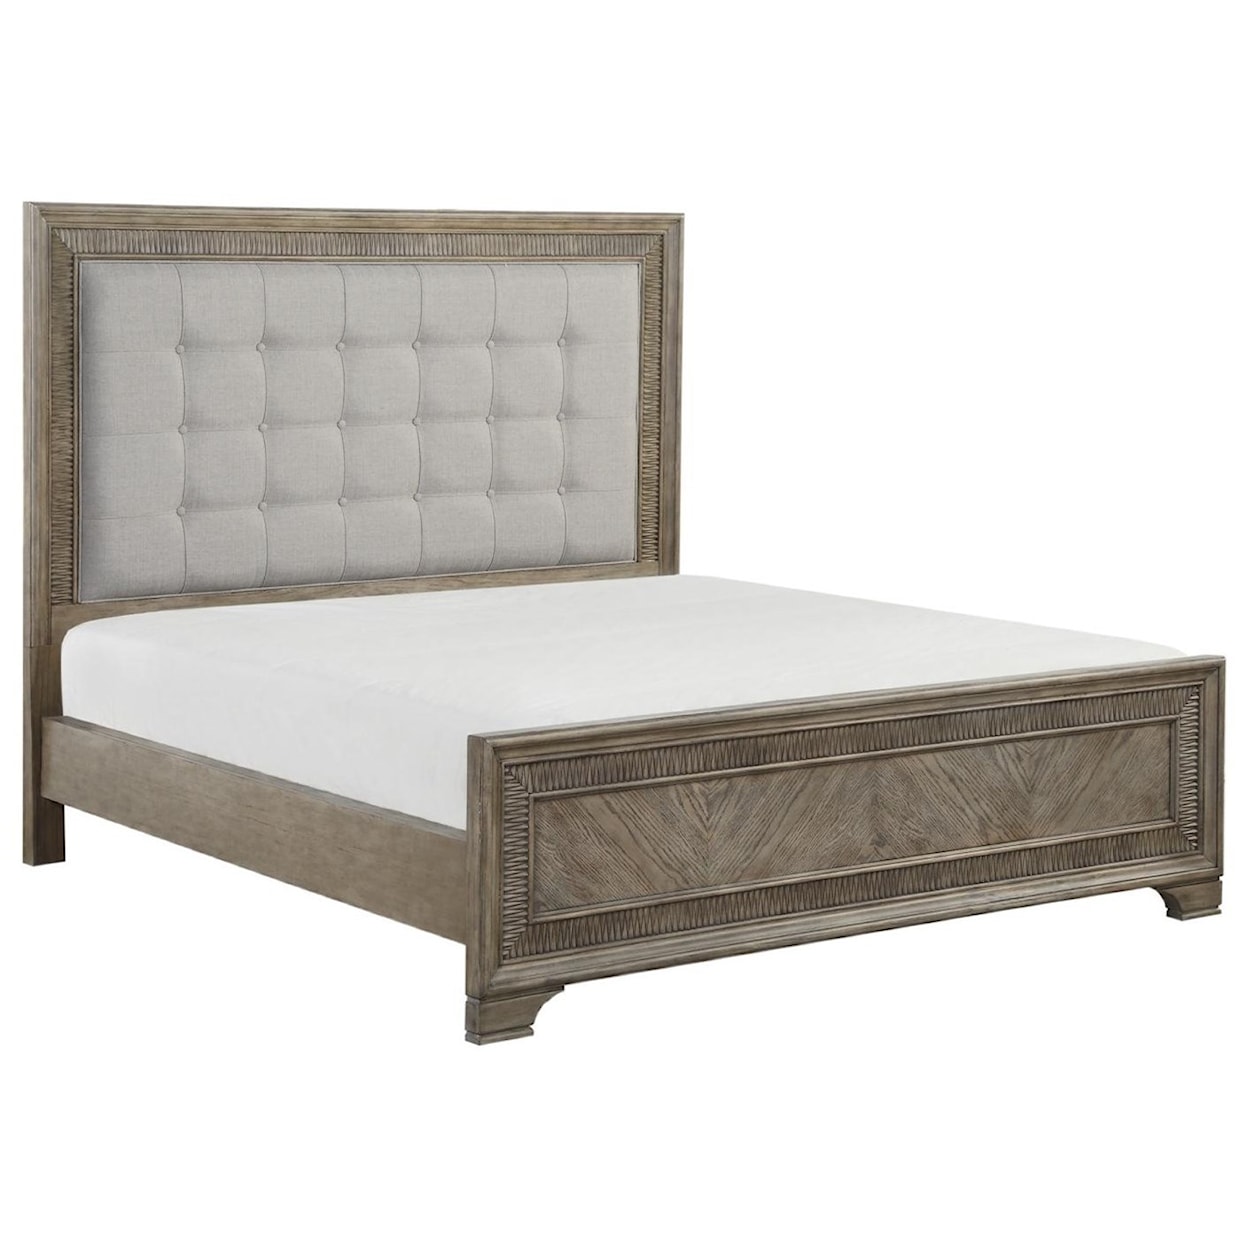 Homelegance Caruth King Bed